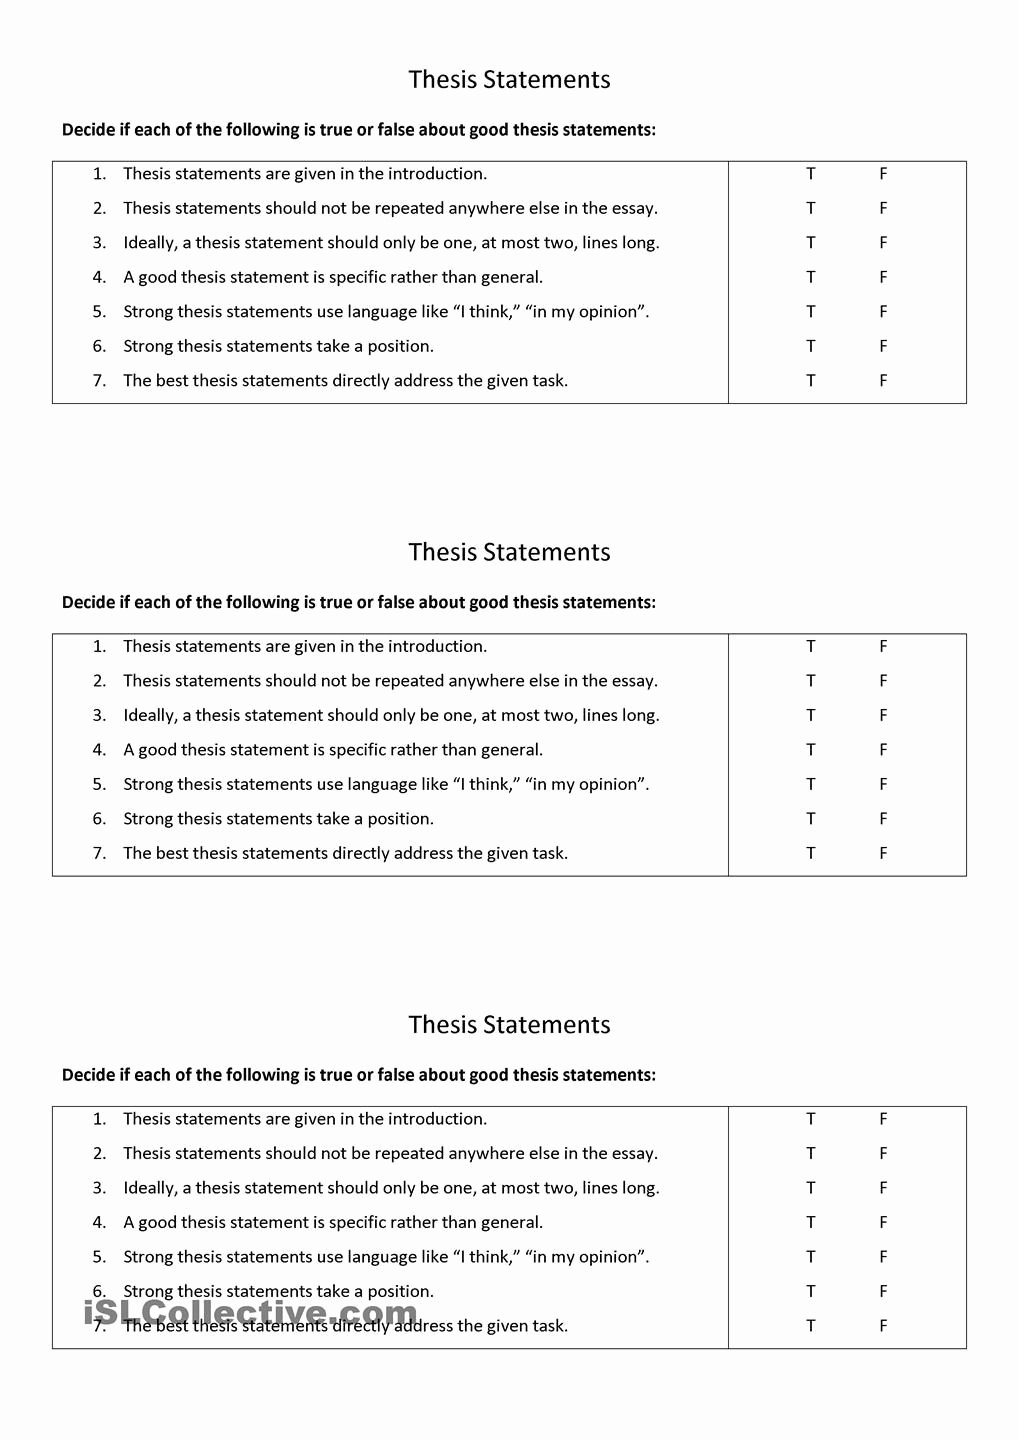 Writing A thesis Statement Worksheet Luxury Good thesis Statements … thesis